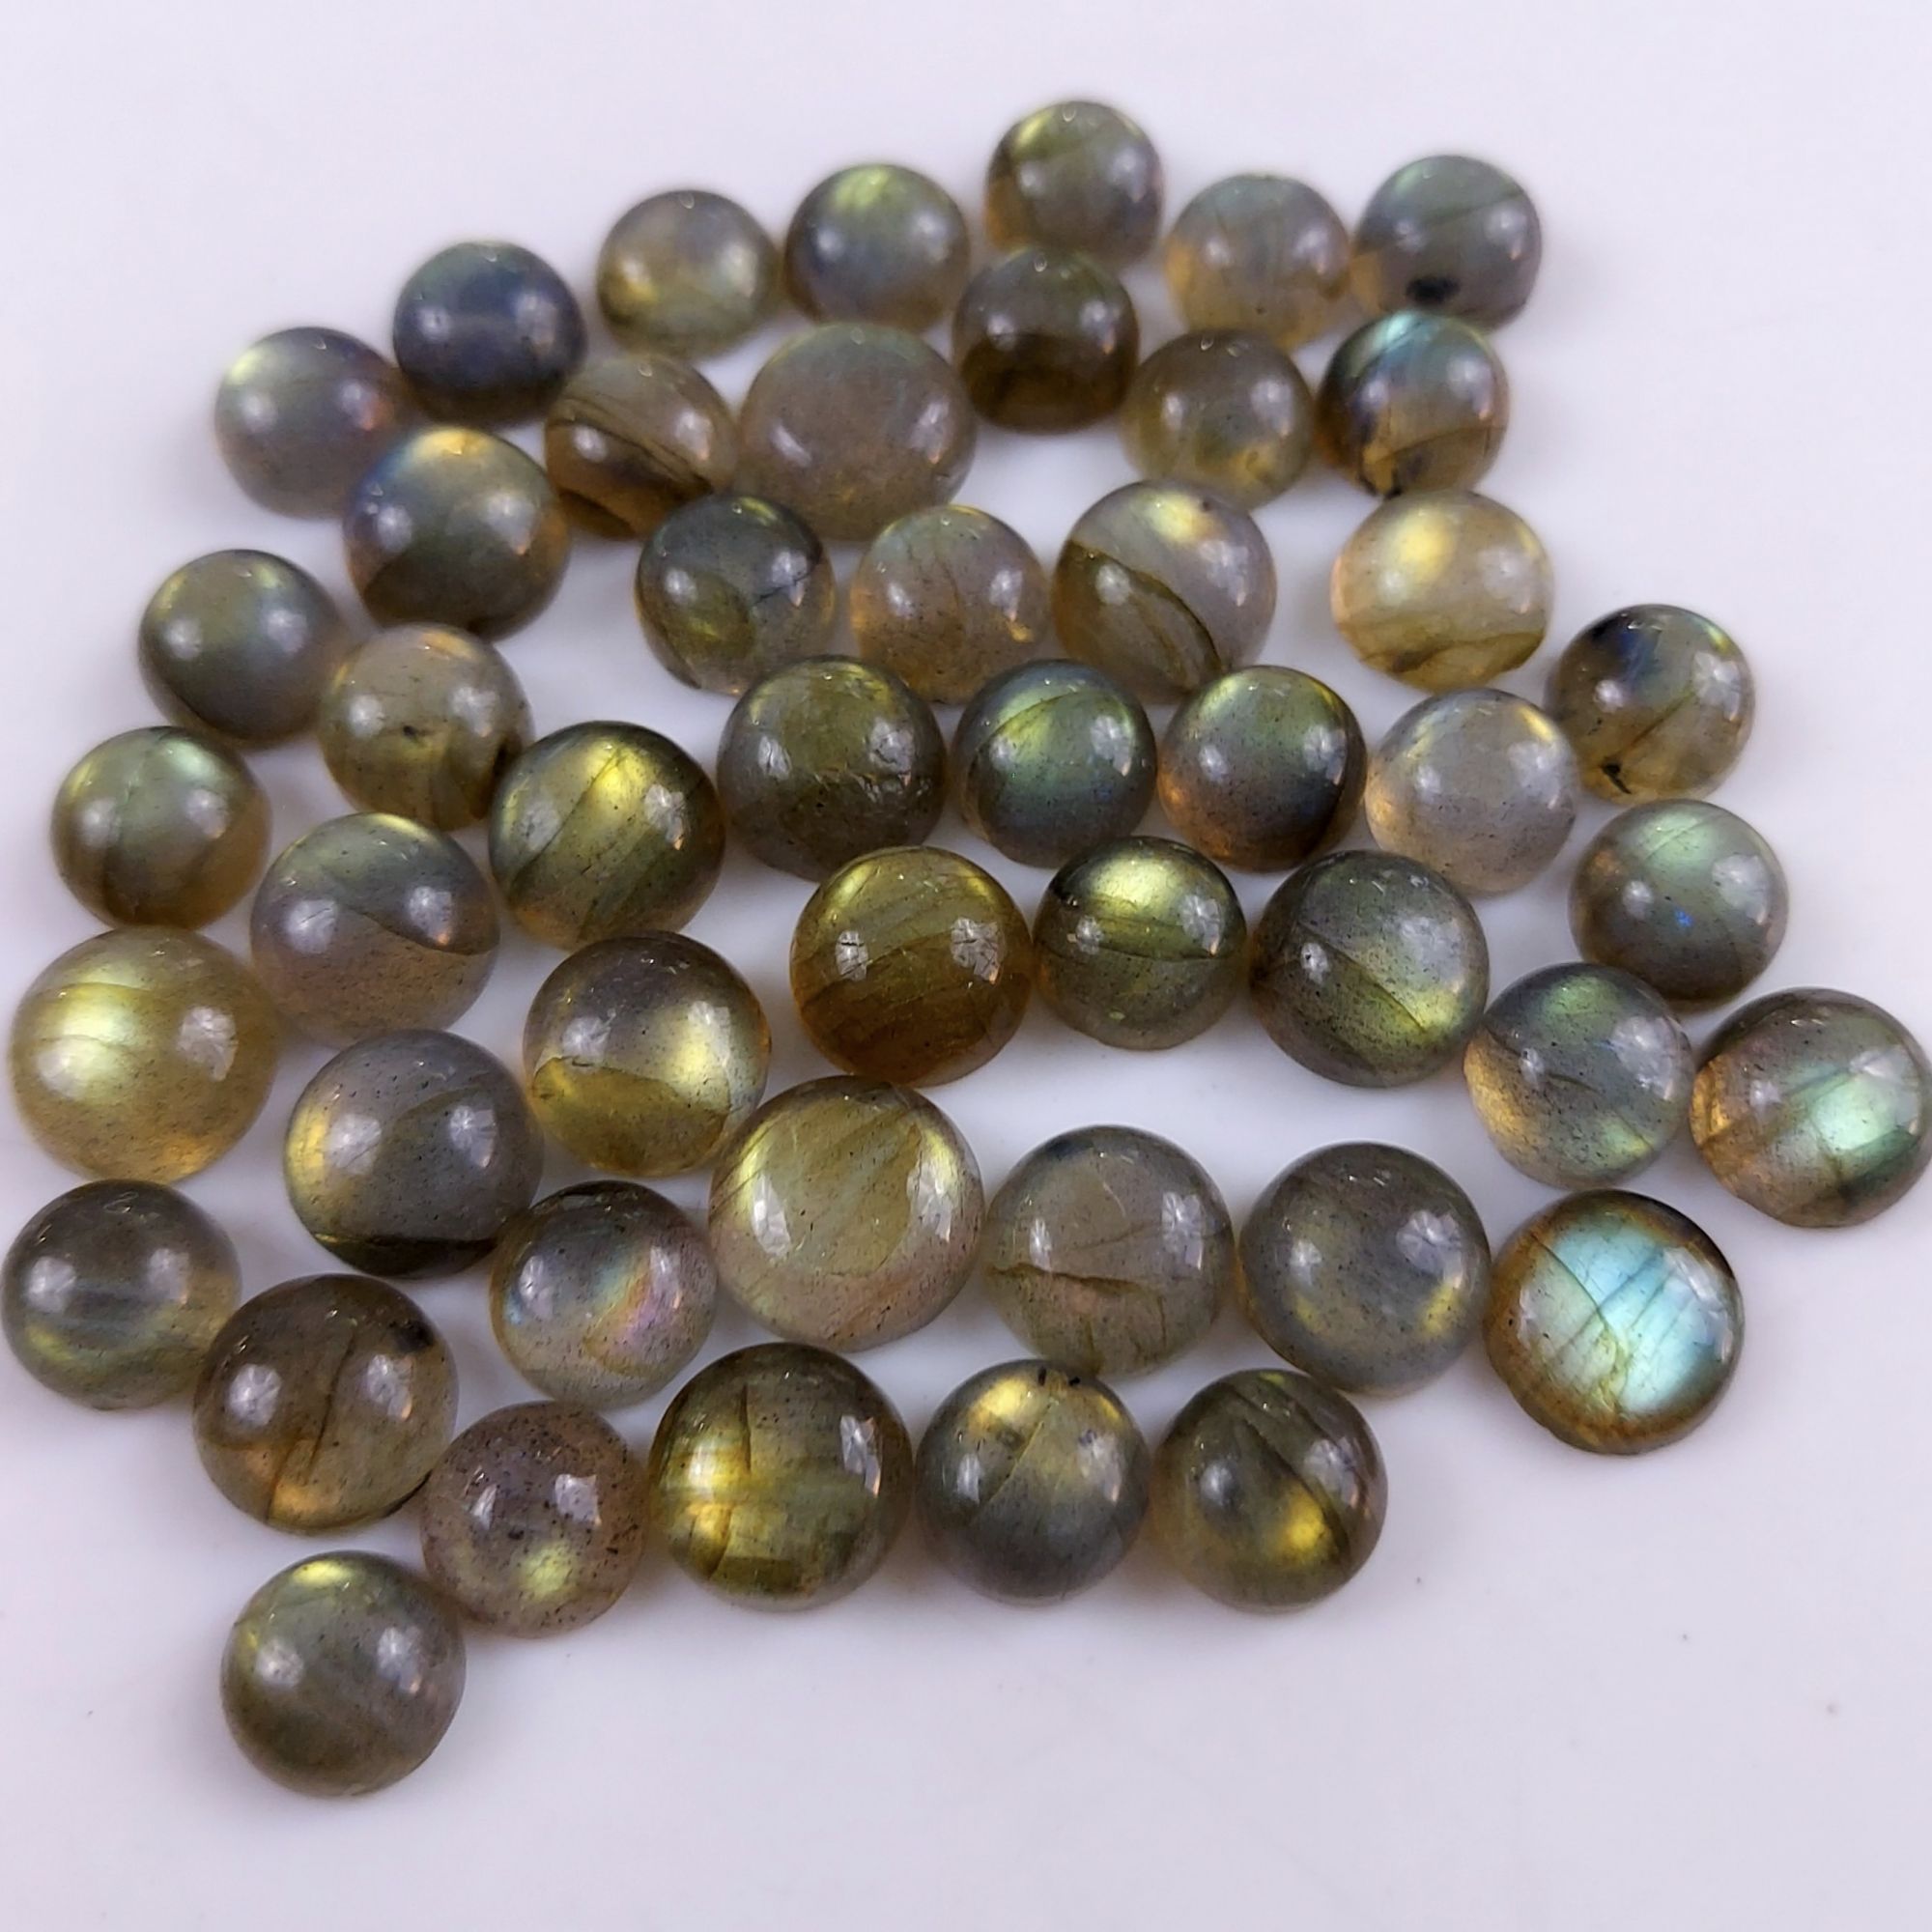 48 Pcs135Cts Natural Multifire Labradorite Loose Cabochon Round Gemstone Lot for Jewelry Making  7x7 5x5mm#1067